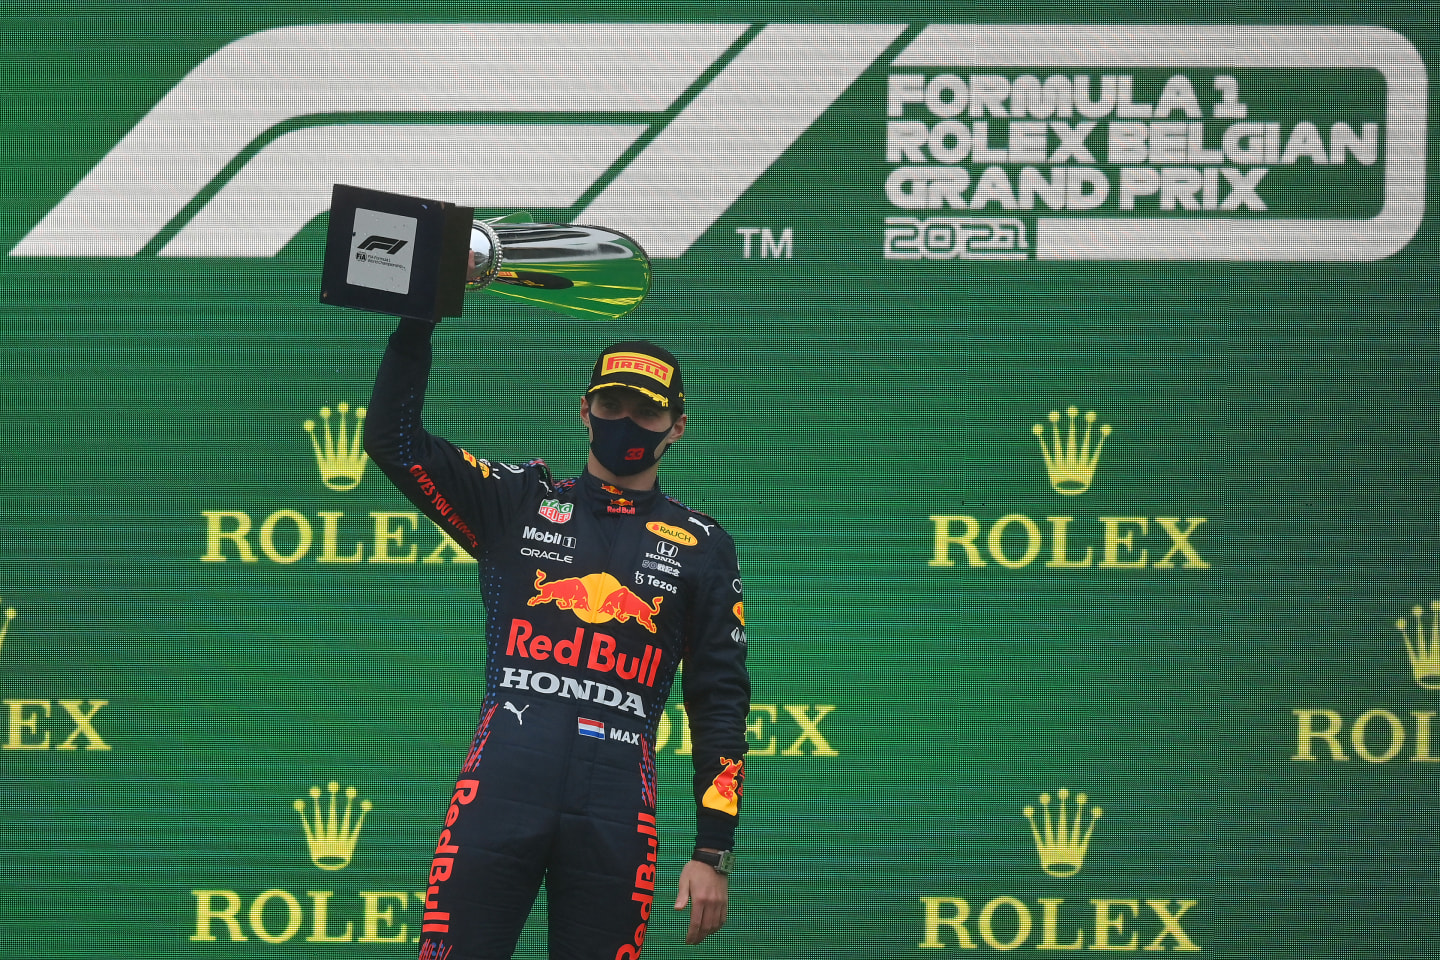 SPA, BELGIUM - AUGUST 29: Race winner Max Verstappen of Netherlands and Red Bull Racing celebrates on the podium during the F1 Grand Prix of Belgium at Circuit de Spa-Francorchamps on August 29, 2021 in Spa, Belgium. (Photo by Dan Mullan/Getty Images)